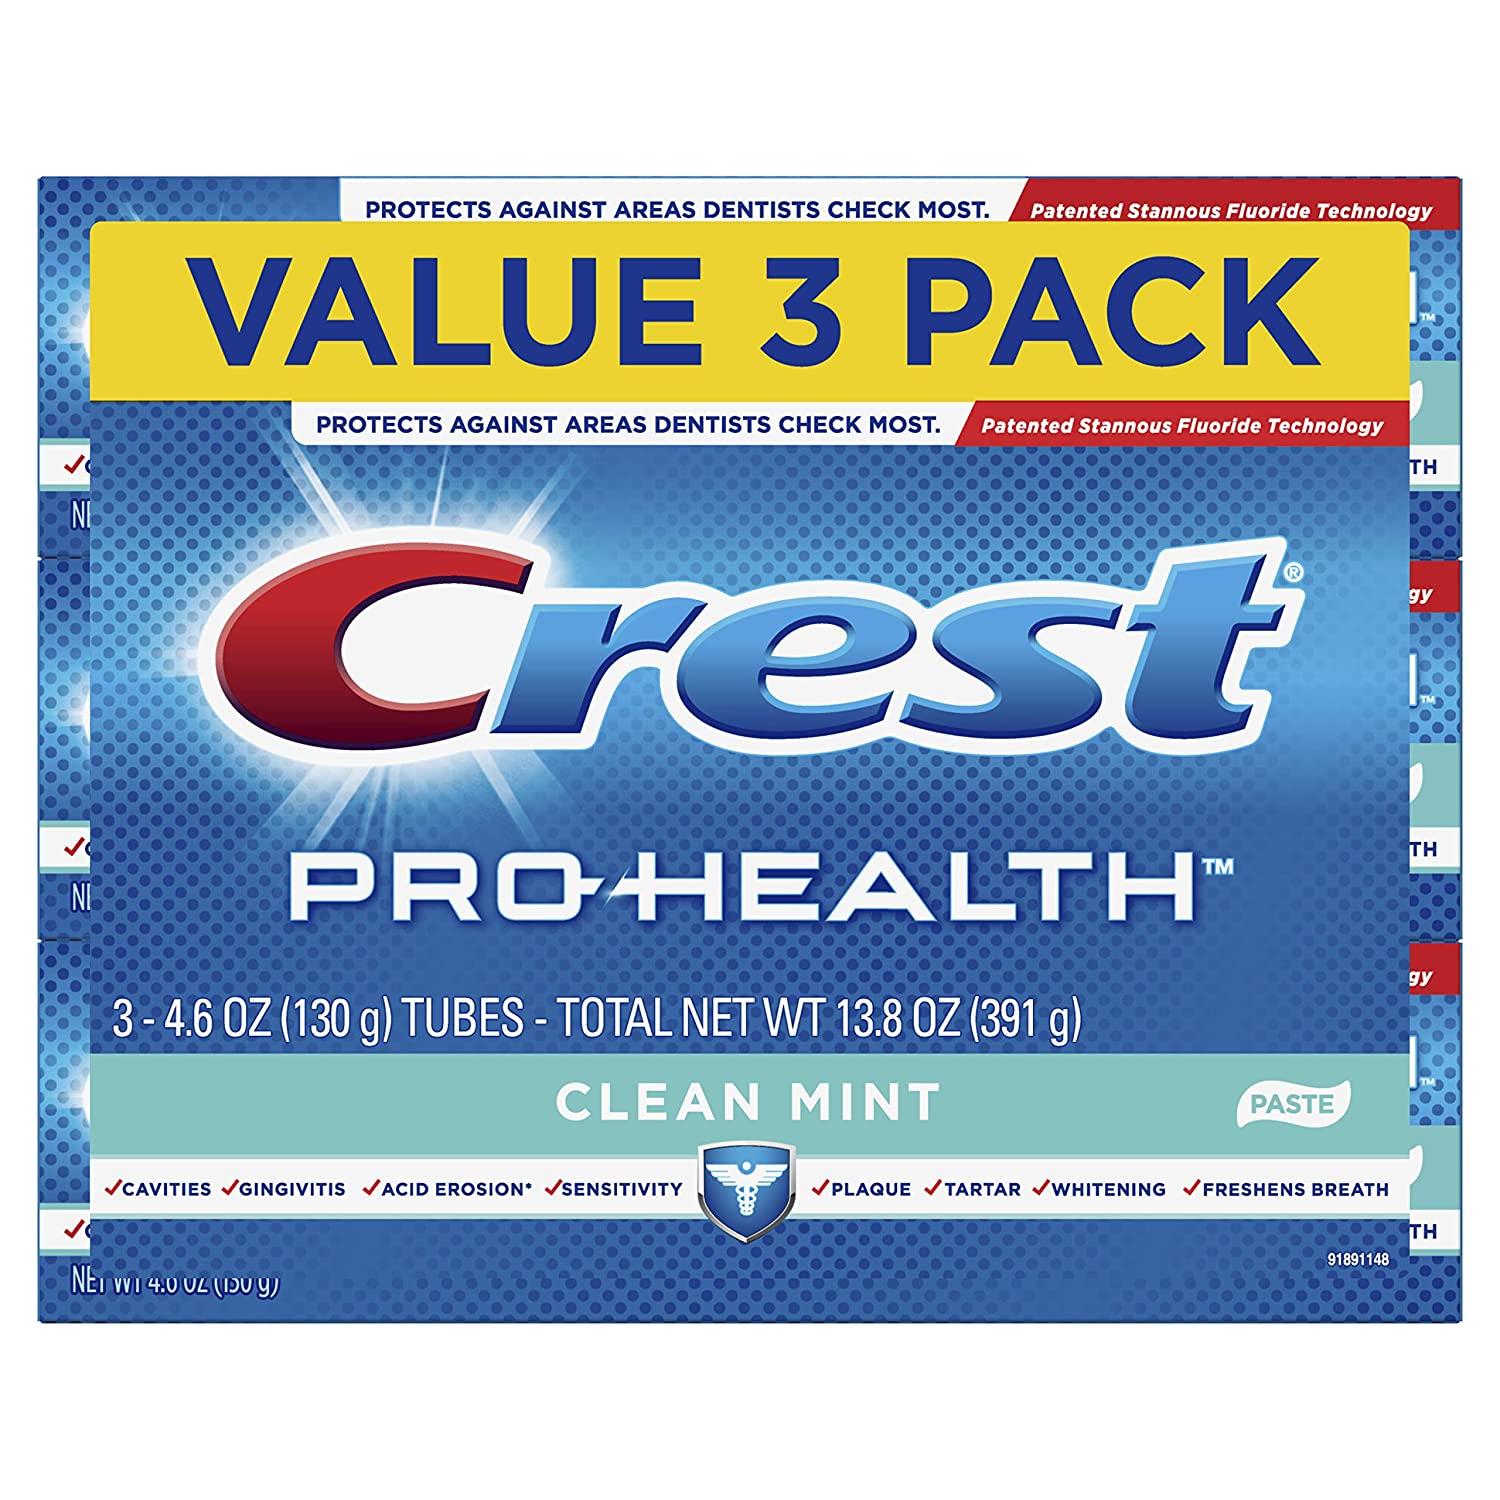 3 Crest Pro-Health Smooth Formula Toothpaste for $4.65 Shipped